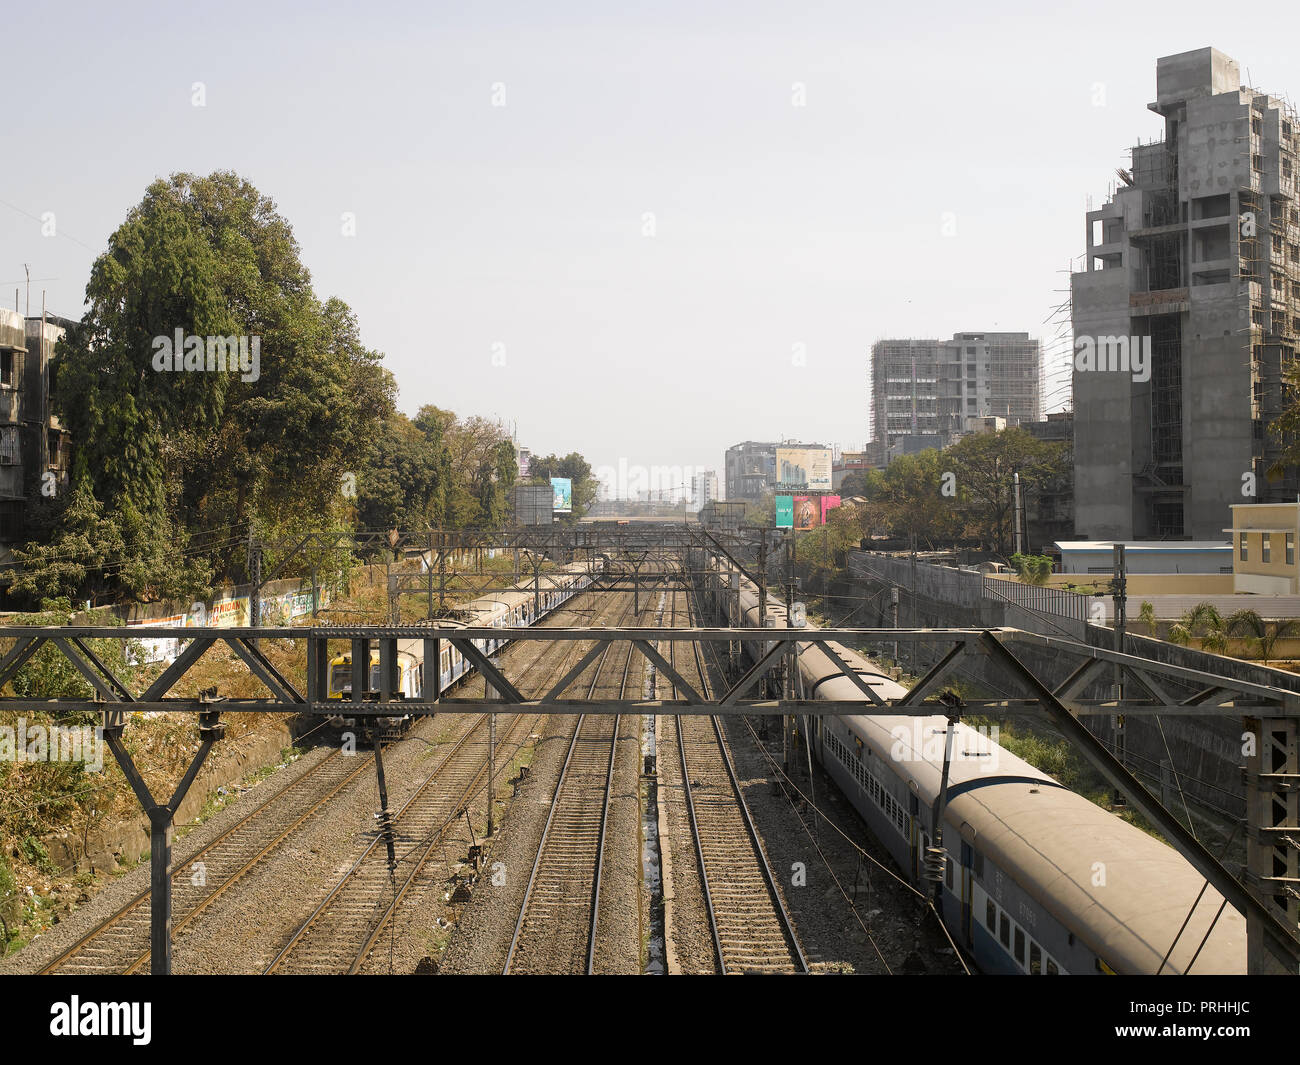 VIEW OF RAILWAY TRACKS AND LOCAL TRAINS IN MUMBAI, INDIA, ASIA Stock Photo